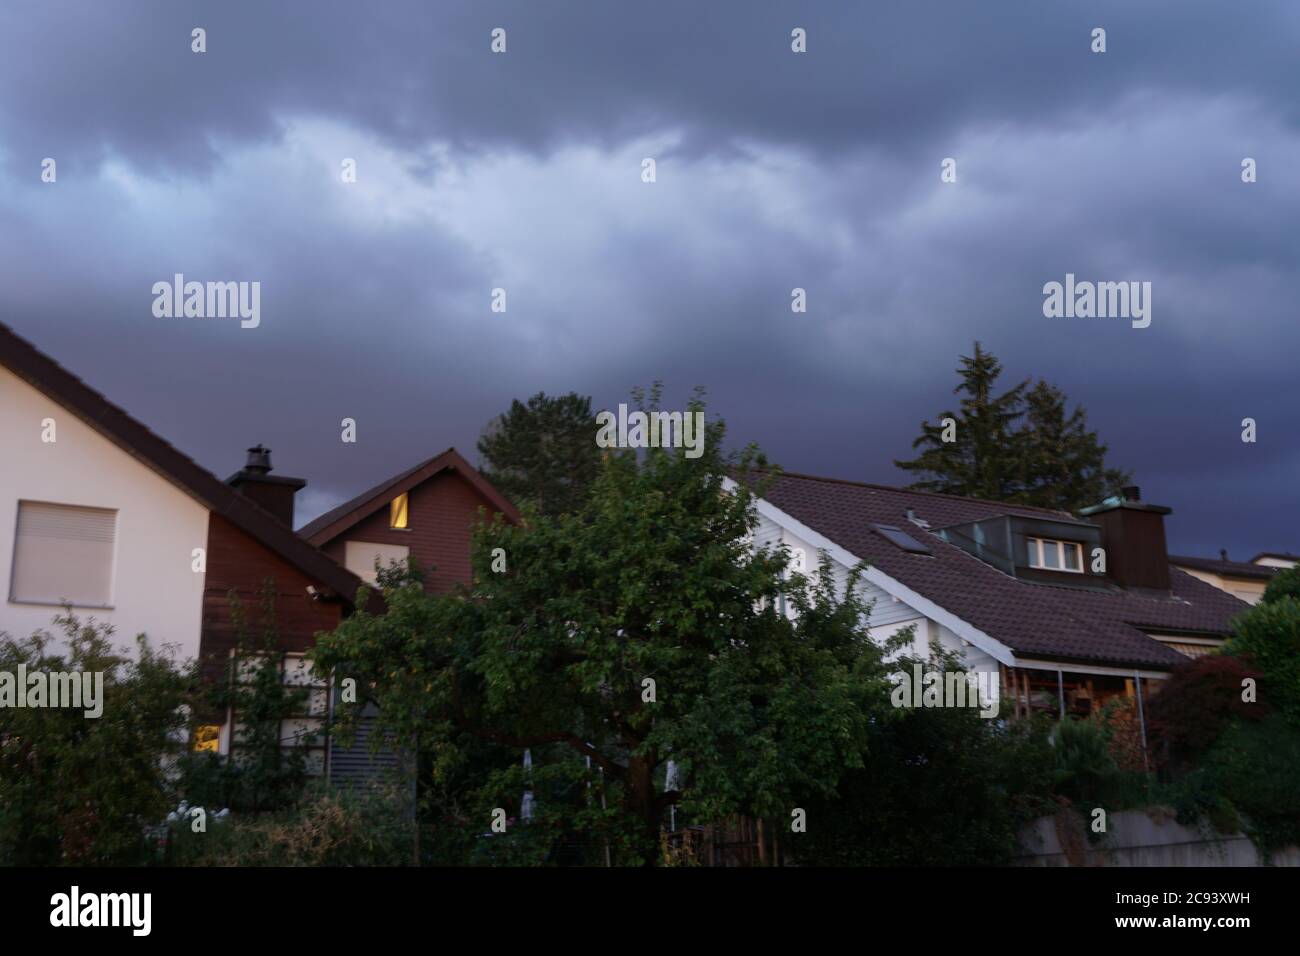 Storm heavy rainy clouds swelling above peaceful residential quarter on a summer evening in Urdorf, Switzerland. Stock Photo